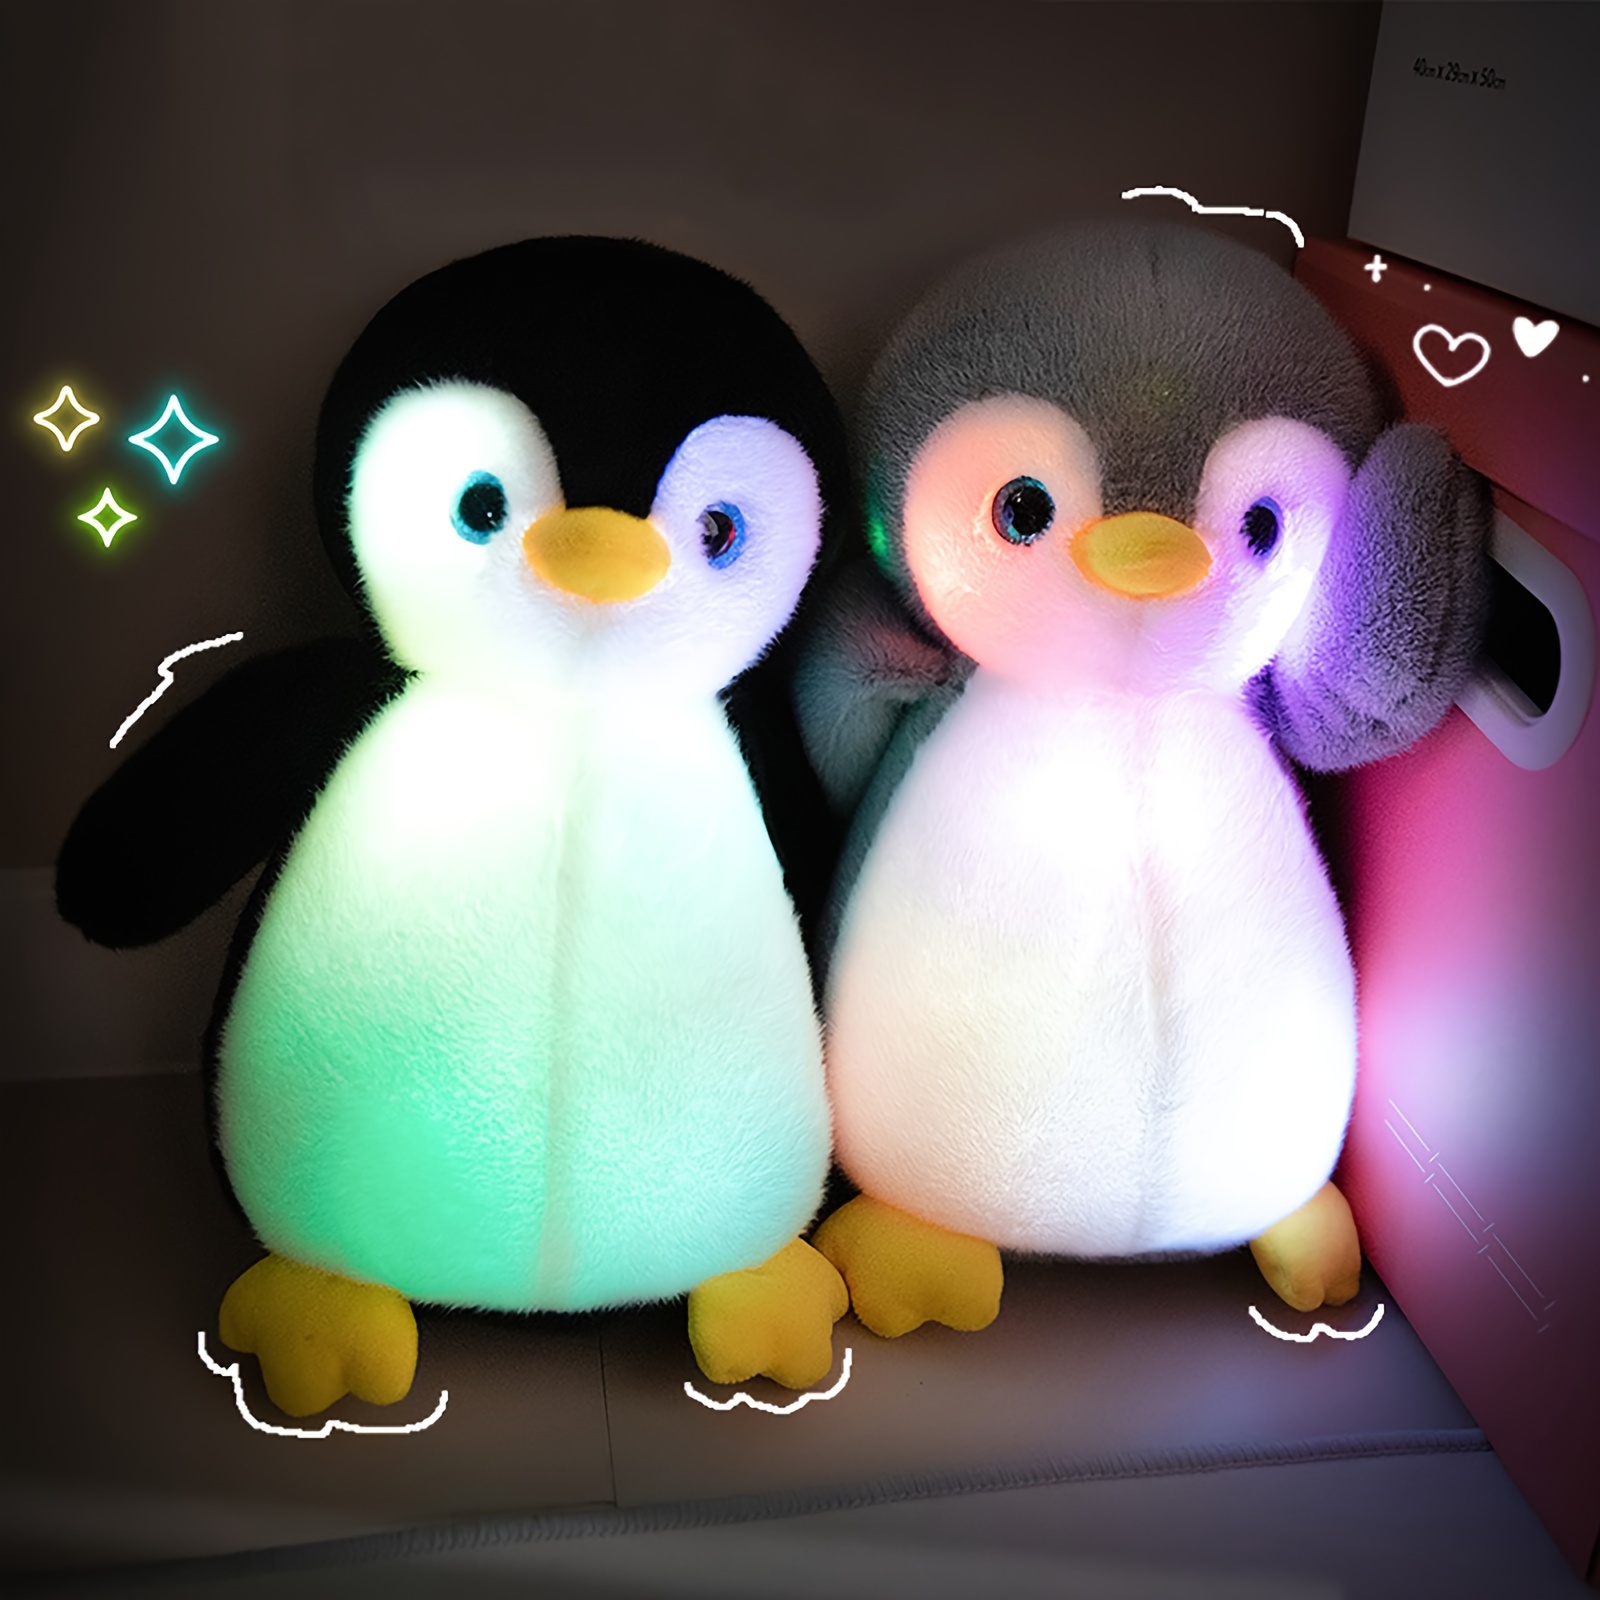 

Luminous Penguin Plush Toy: Adorable Led Glow Nightlight For Kids - Perfect For Birthdays, Valentine's Day, And Christmas - Suitable For Ages 0-3 - Made With Soft Viscose Fabric - From The Brand Akkun